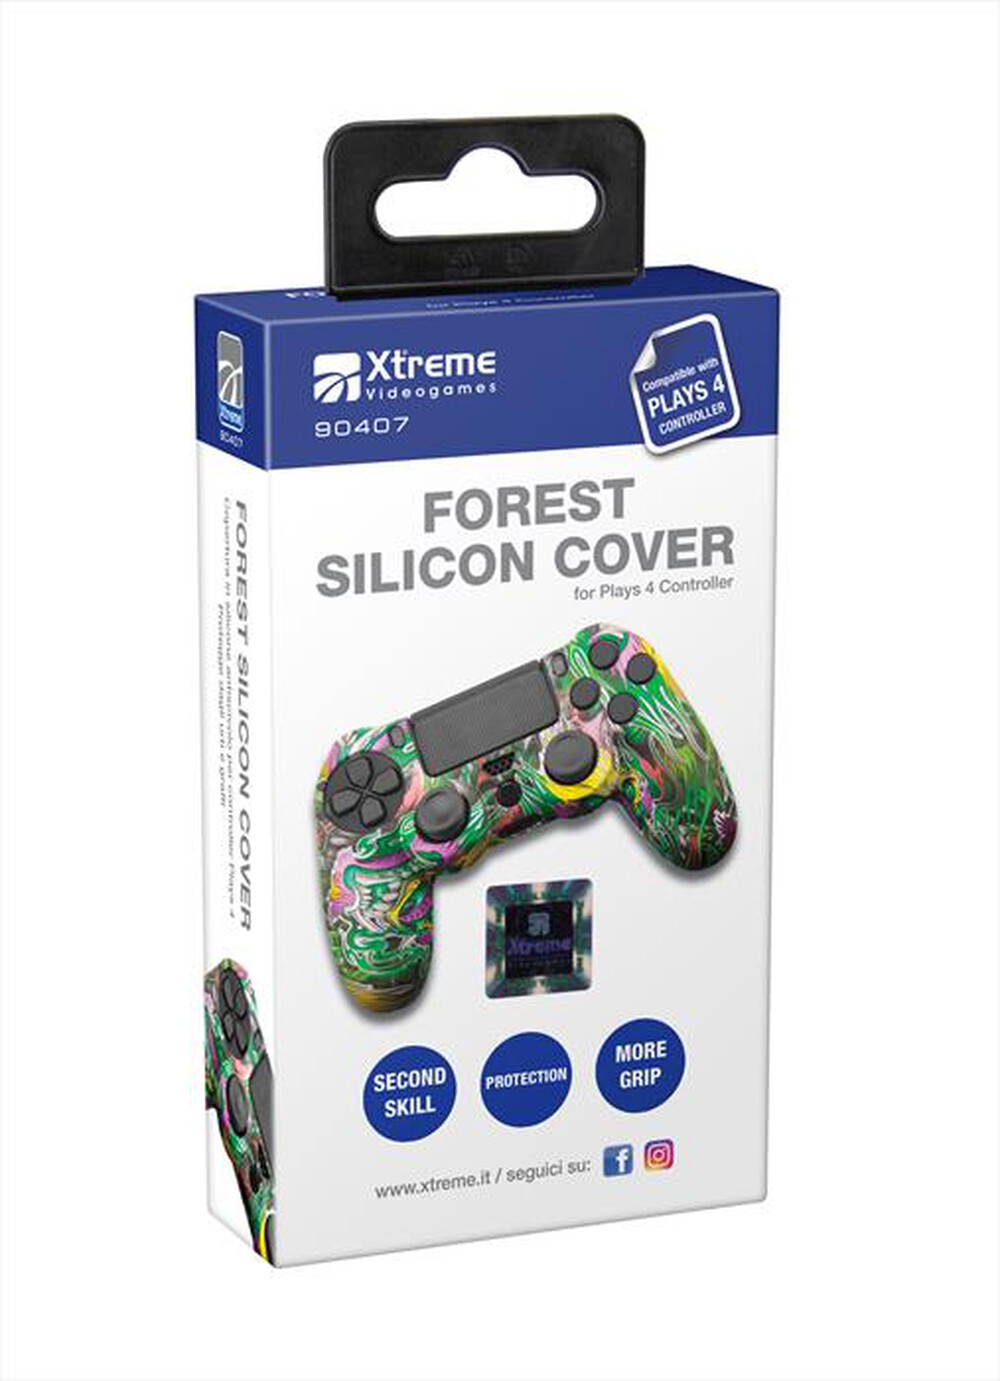 "XTREME - FOREST SILICON COVER-FOREST"